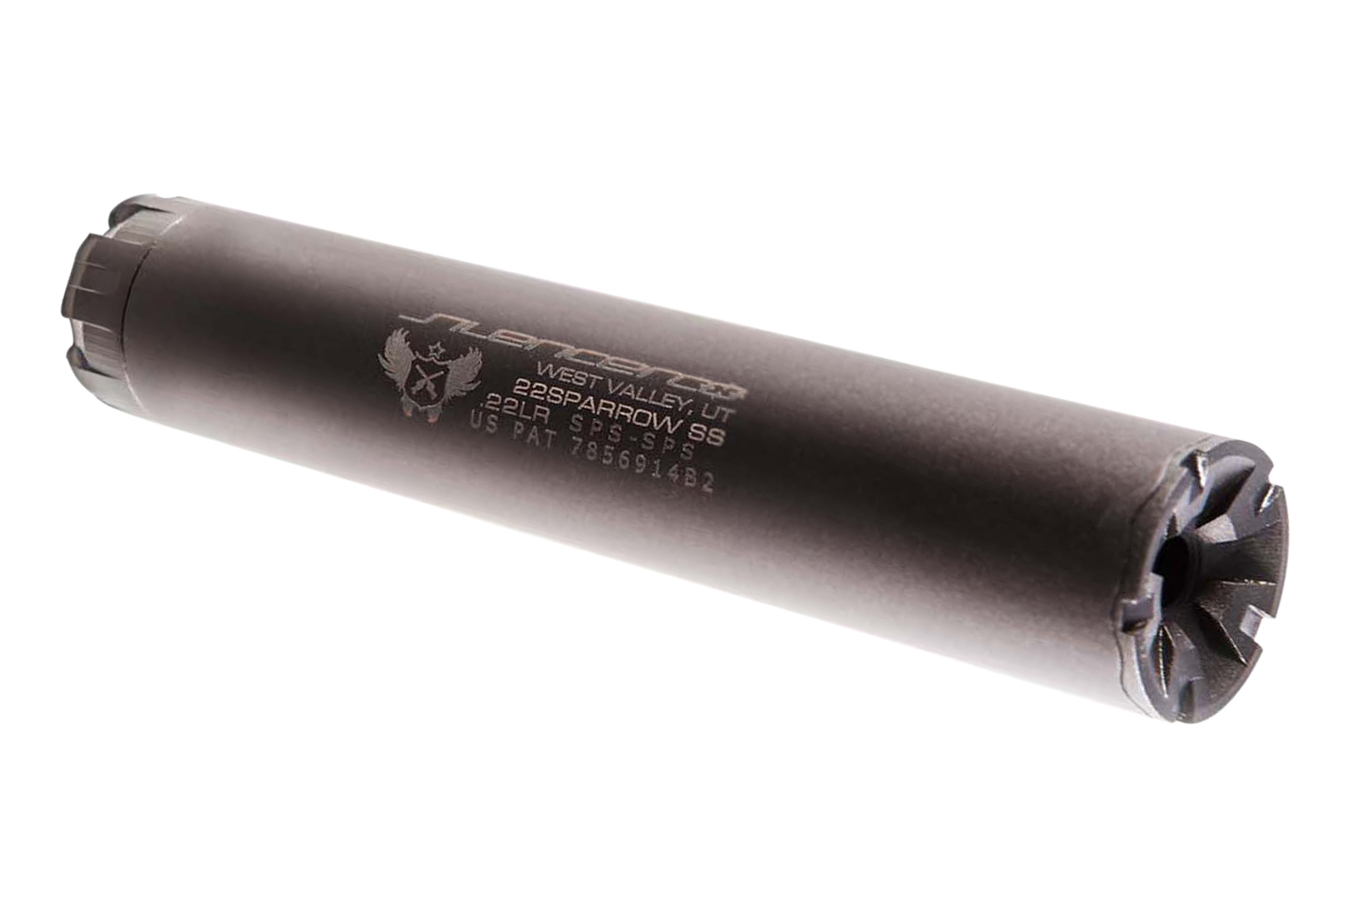 No. 8 Best Selling: SILENCERCO SPARROW 22 SUPPRESSOR